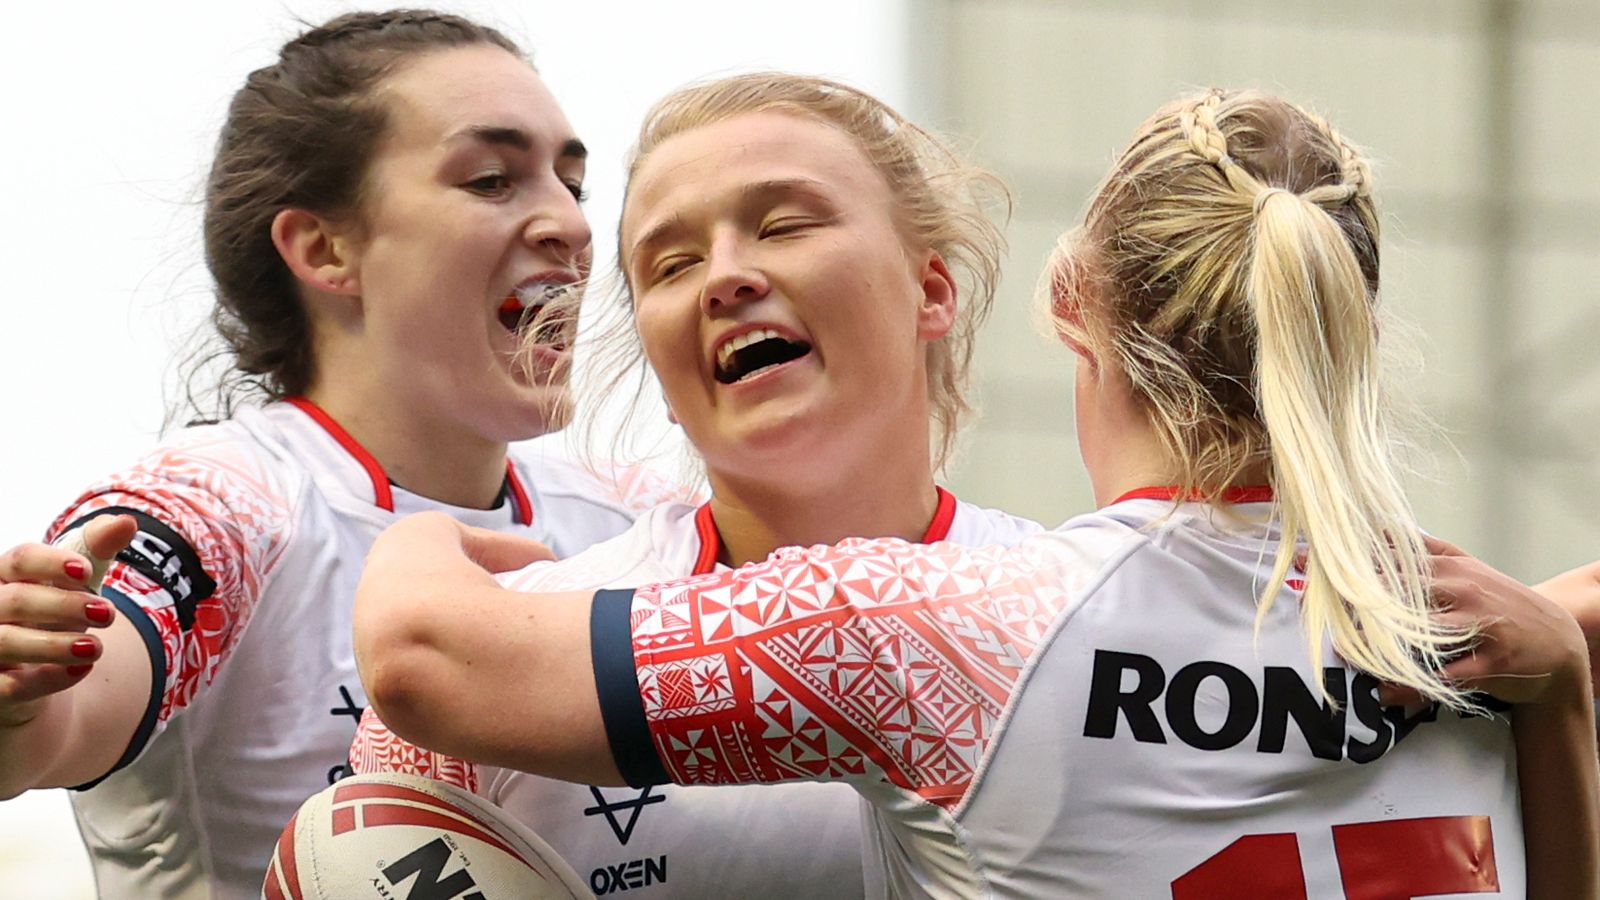 England 36-10 France: Amy Hardcastle and Georgia Roche double up in win for hosts